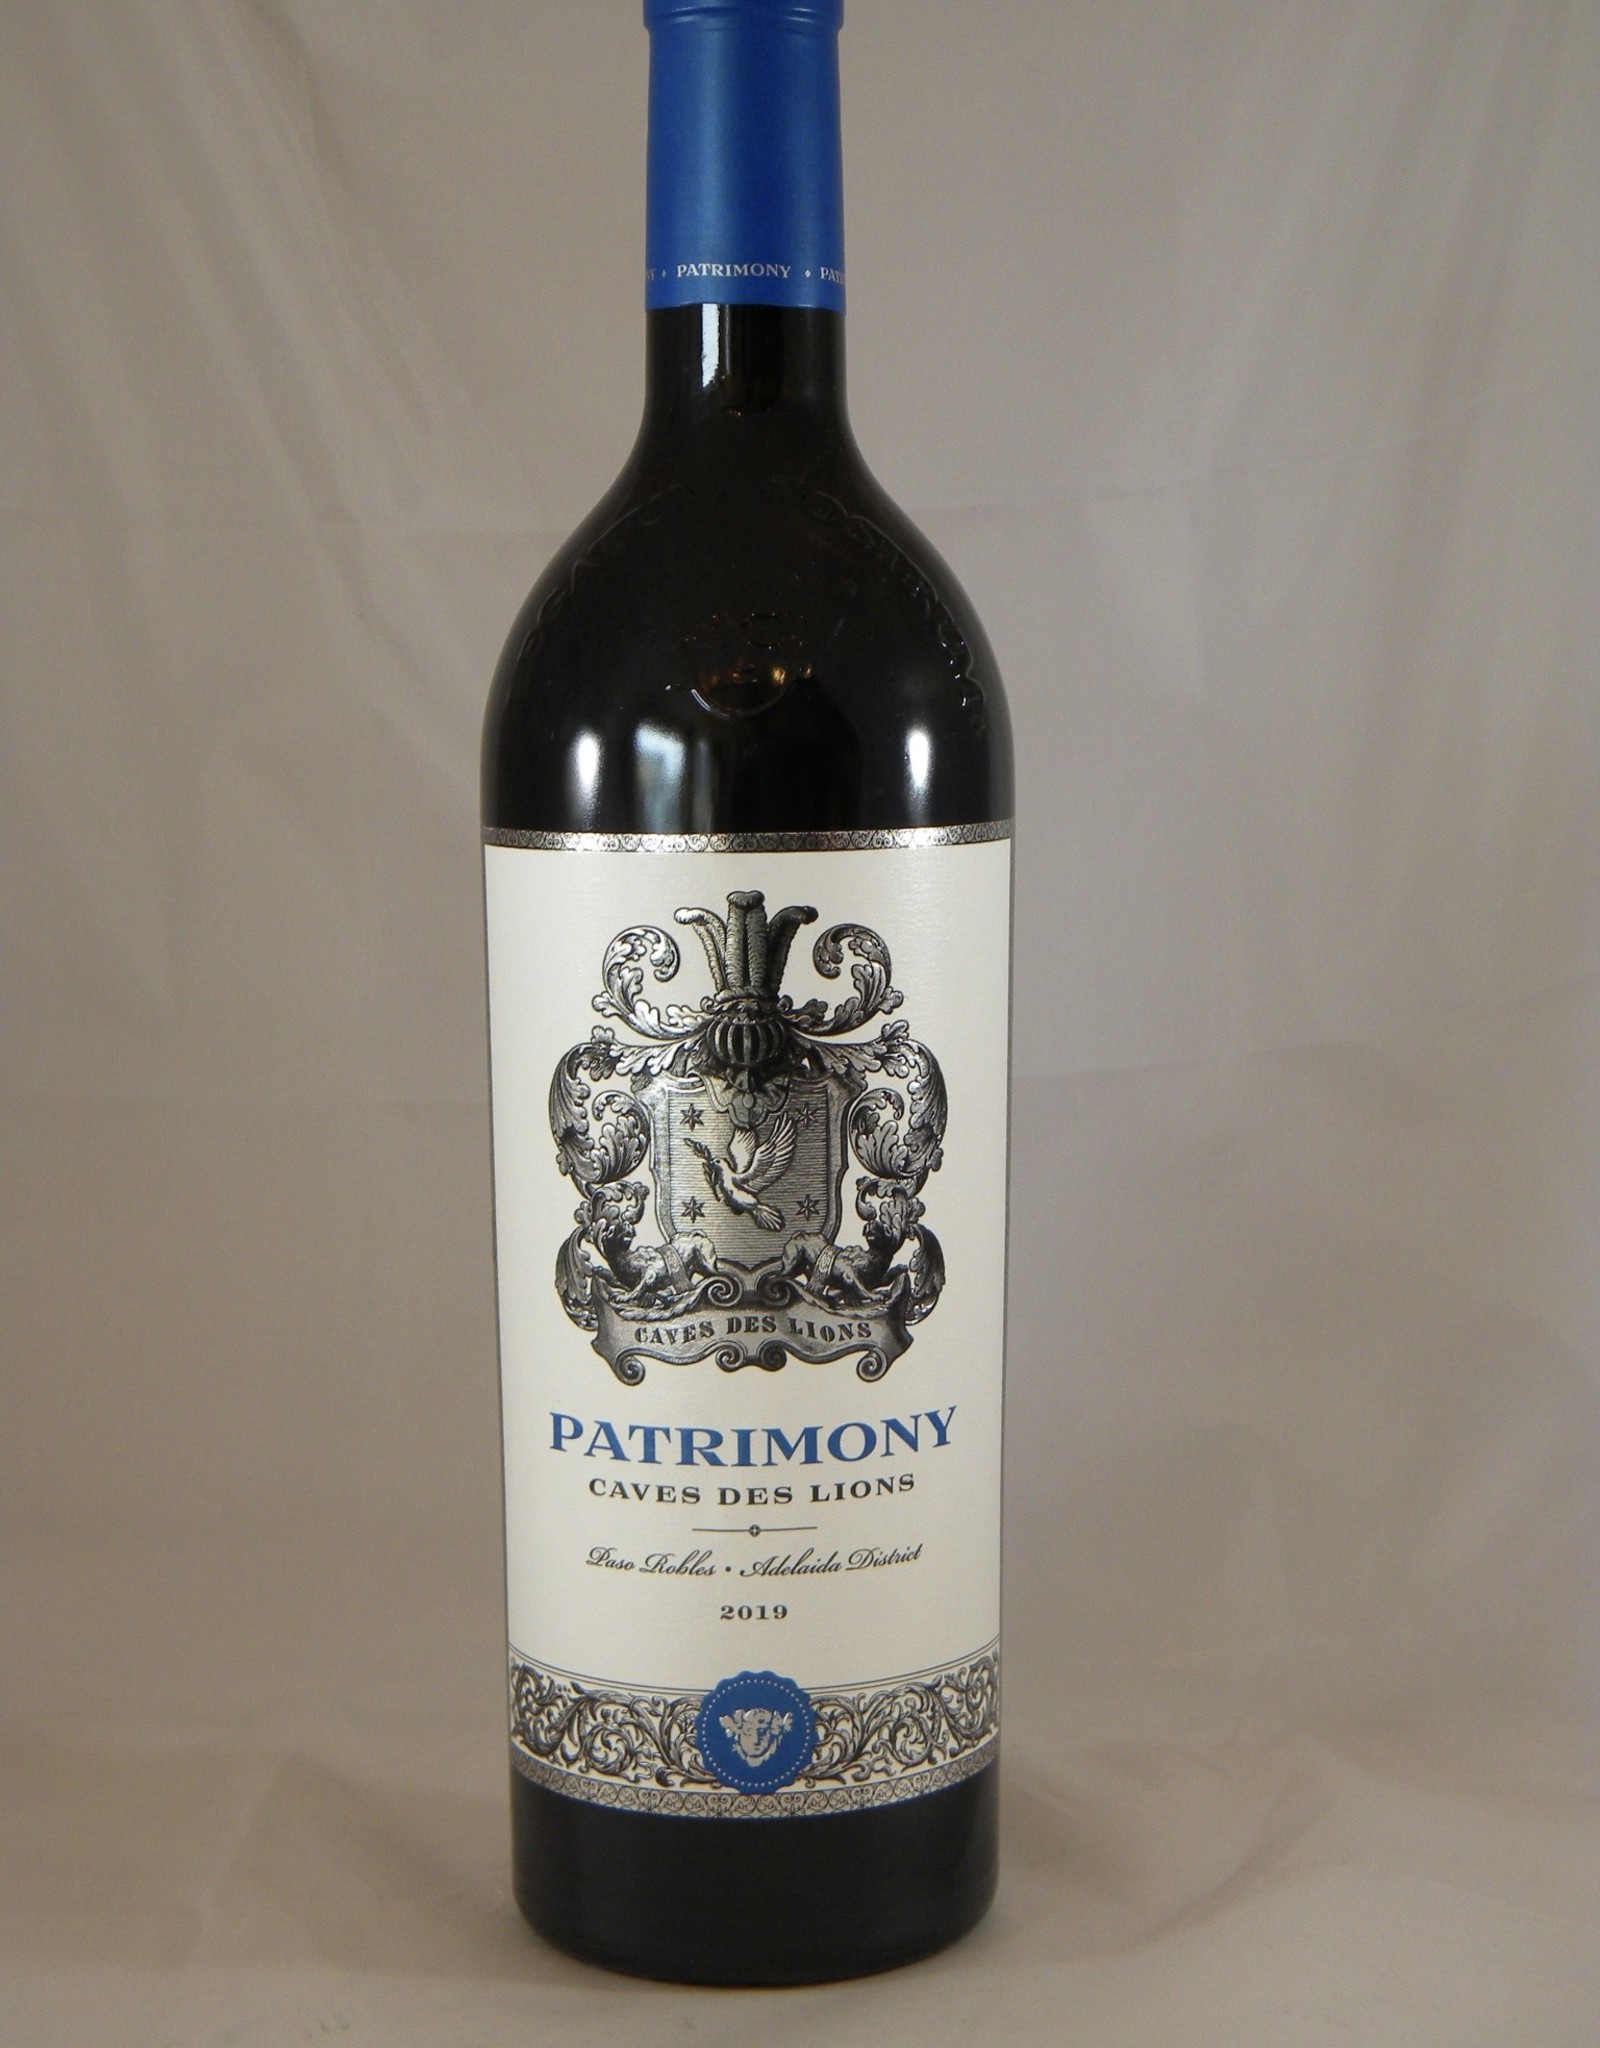 Daou Red Blend Paso Robles Patrimony 2019